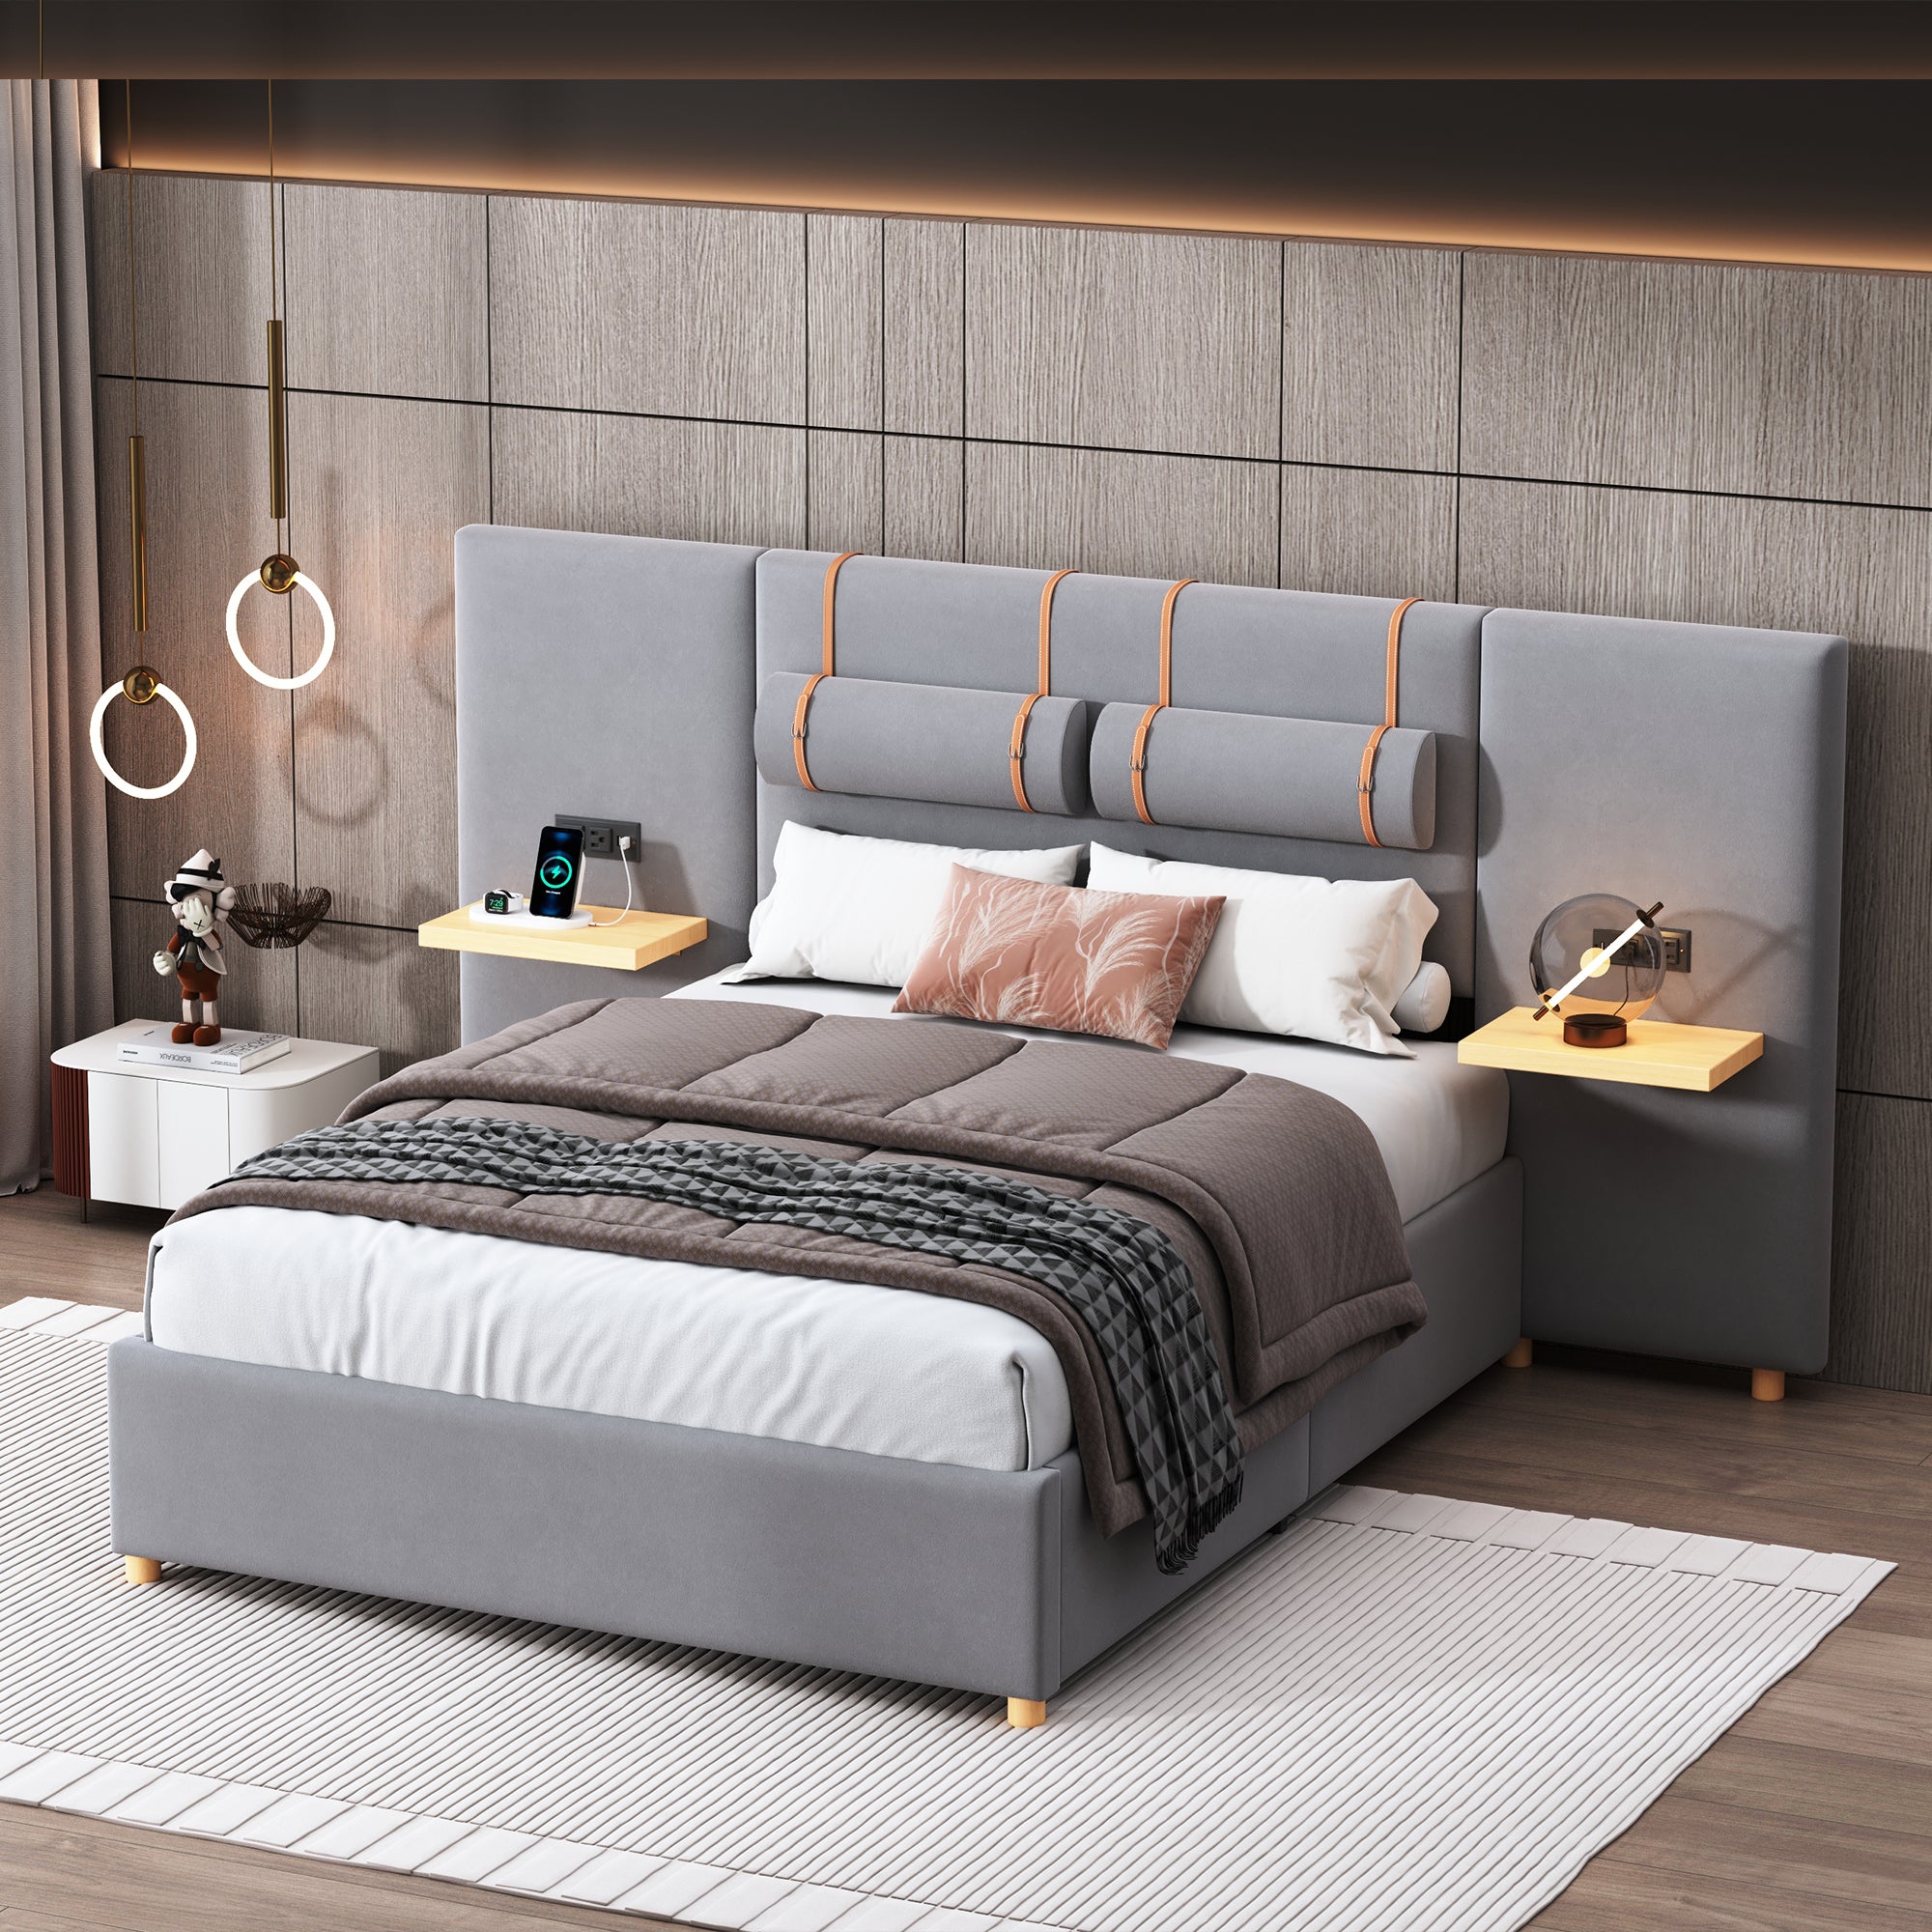 Full Size Upholstered Platform Bed With Two Outlets and USB Charging Ports on Both Sides, Two Bedside Pillows, Storage Shelf, Velvet, Gray